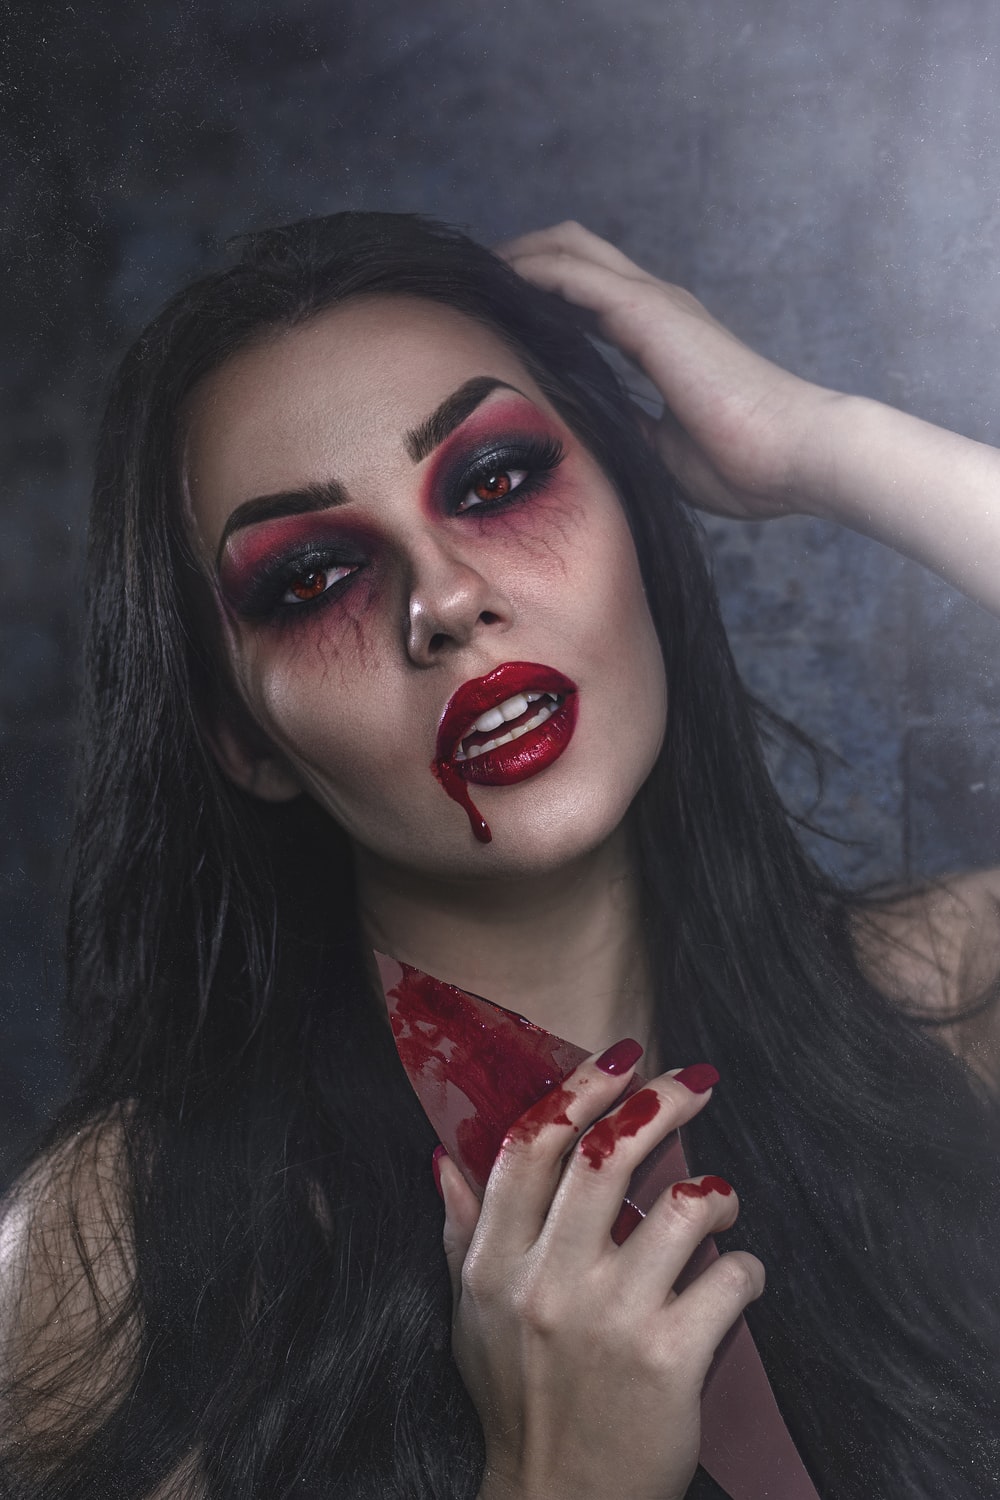 Vampire Picture [HD]. Download Free Image